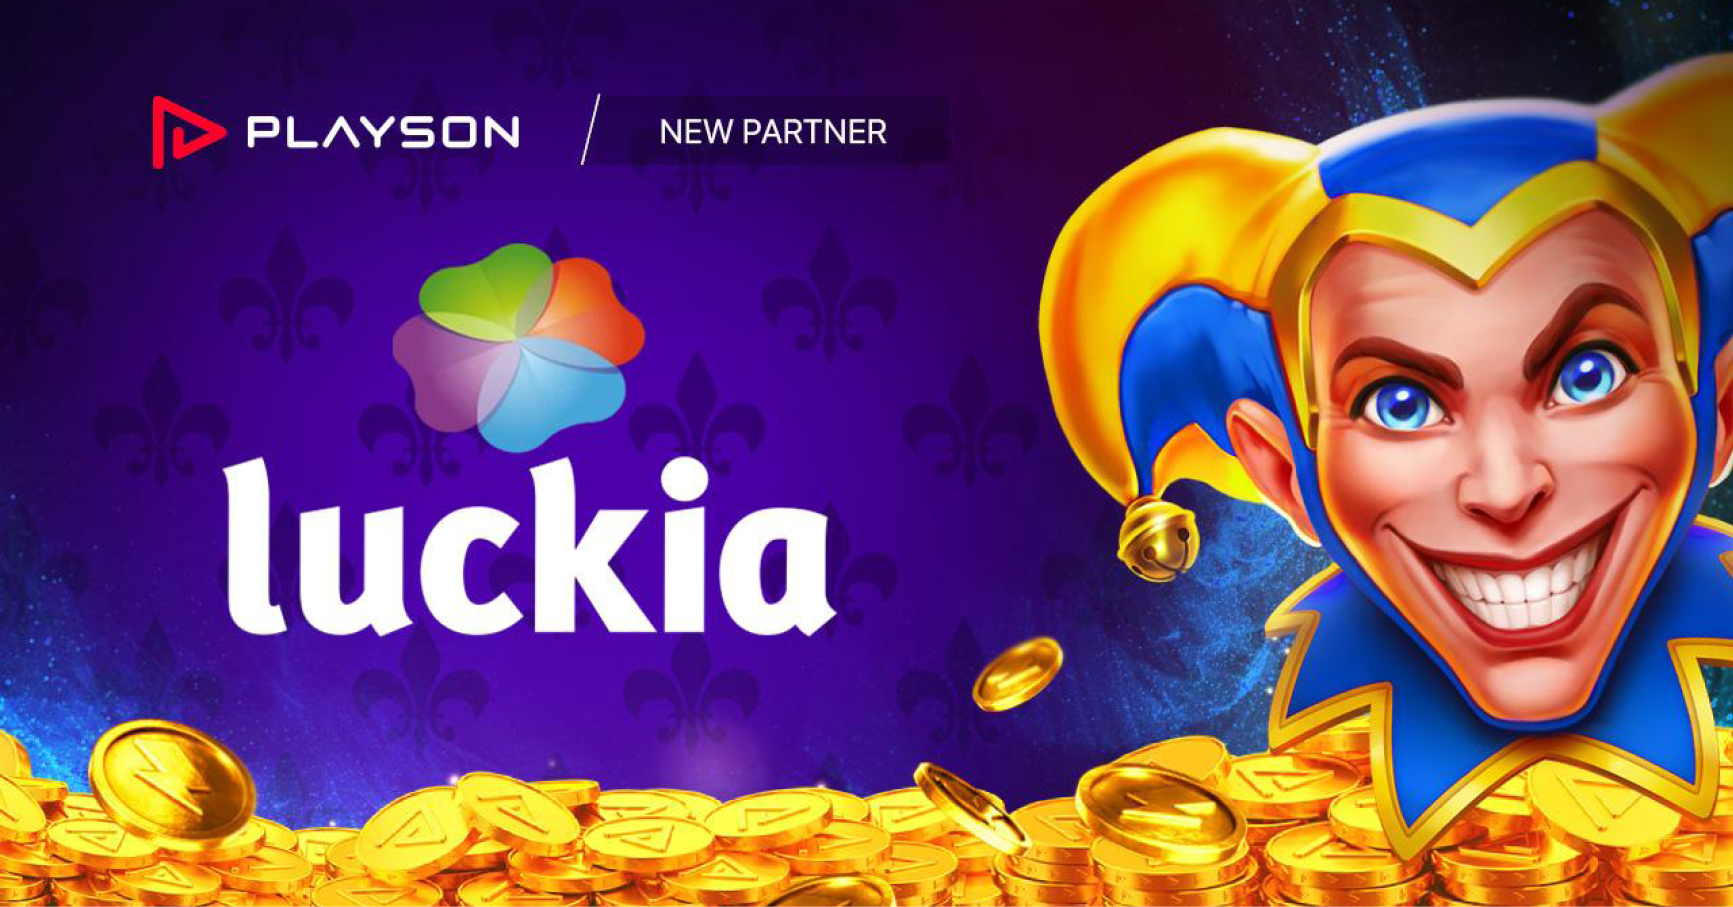 Playson goes live with Spanish operator Luckia